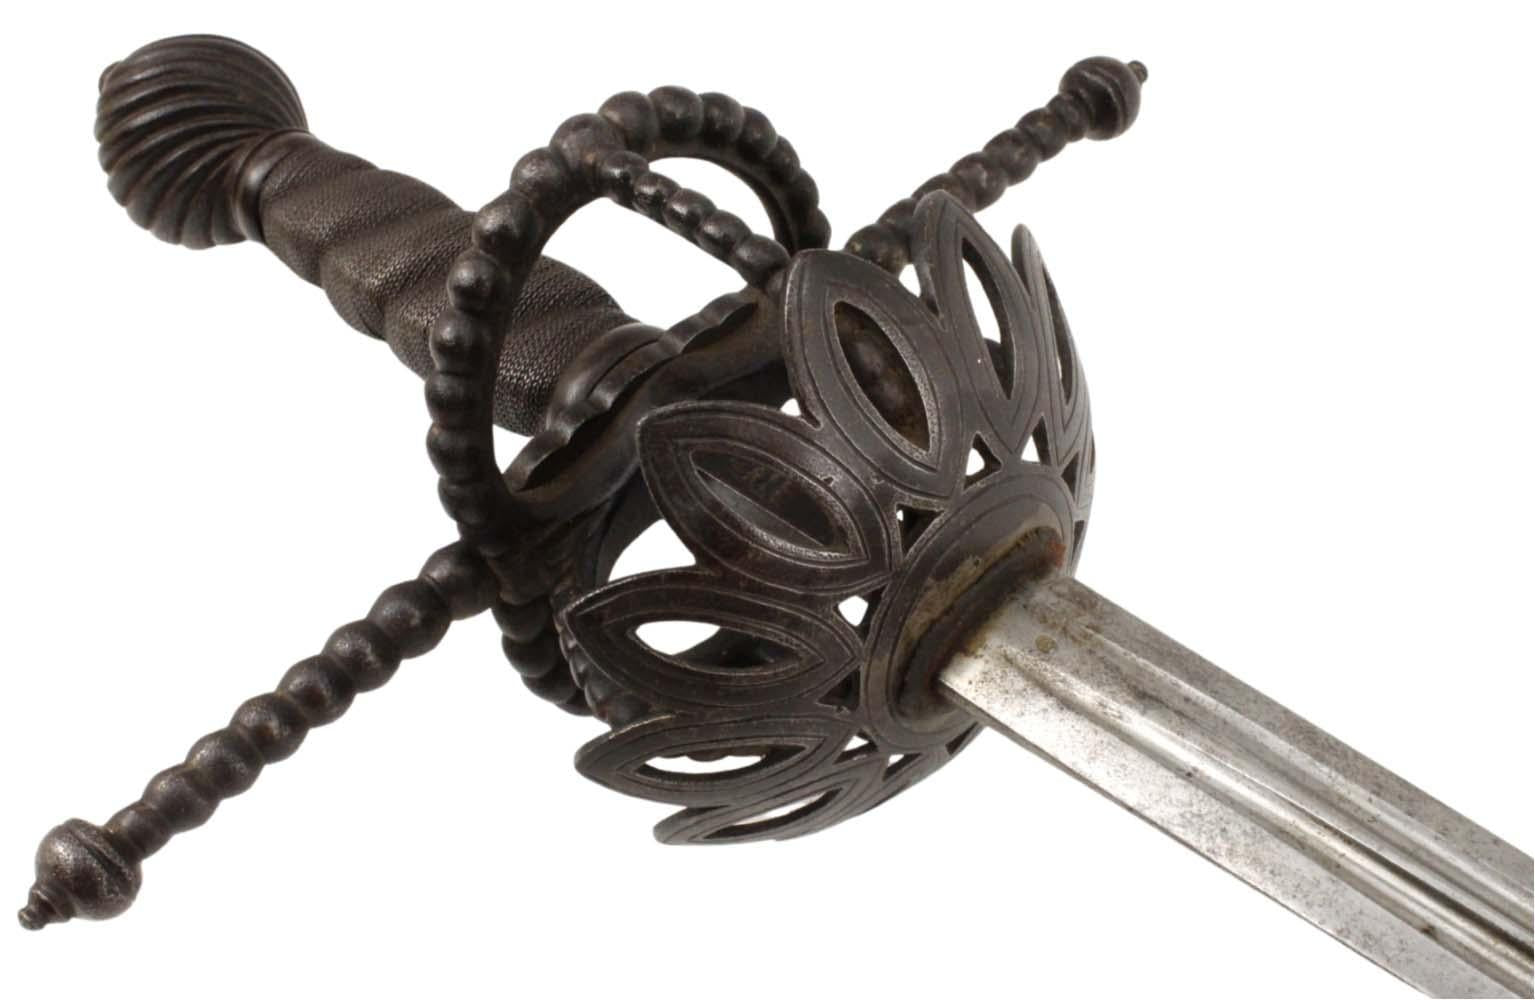 French Musketeer Type Rapier Sword with strong and maker marked double-fullered blade and distinctive iron hilt pattern